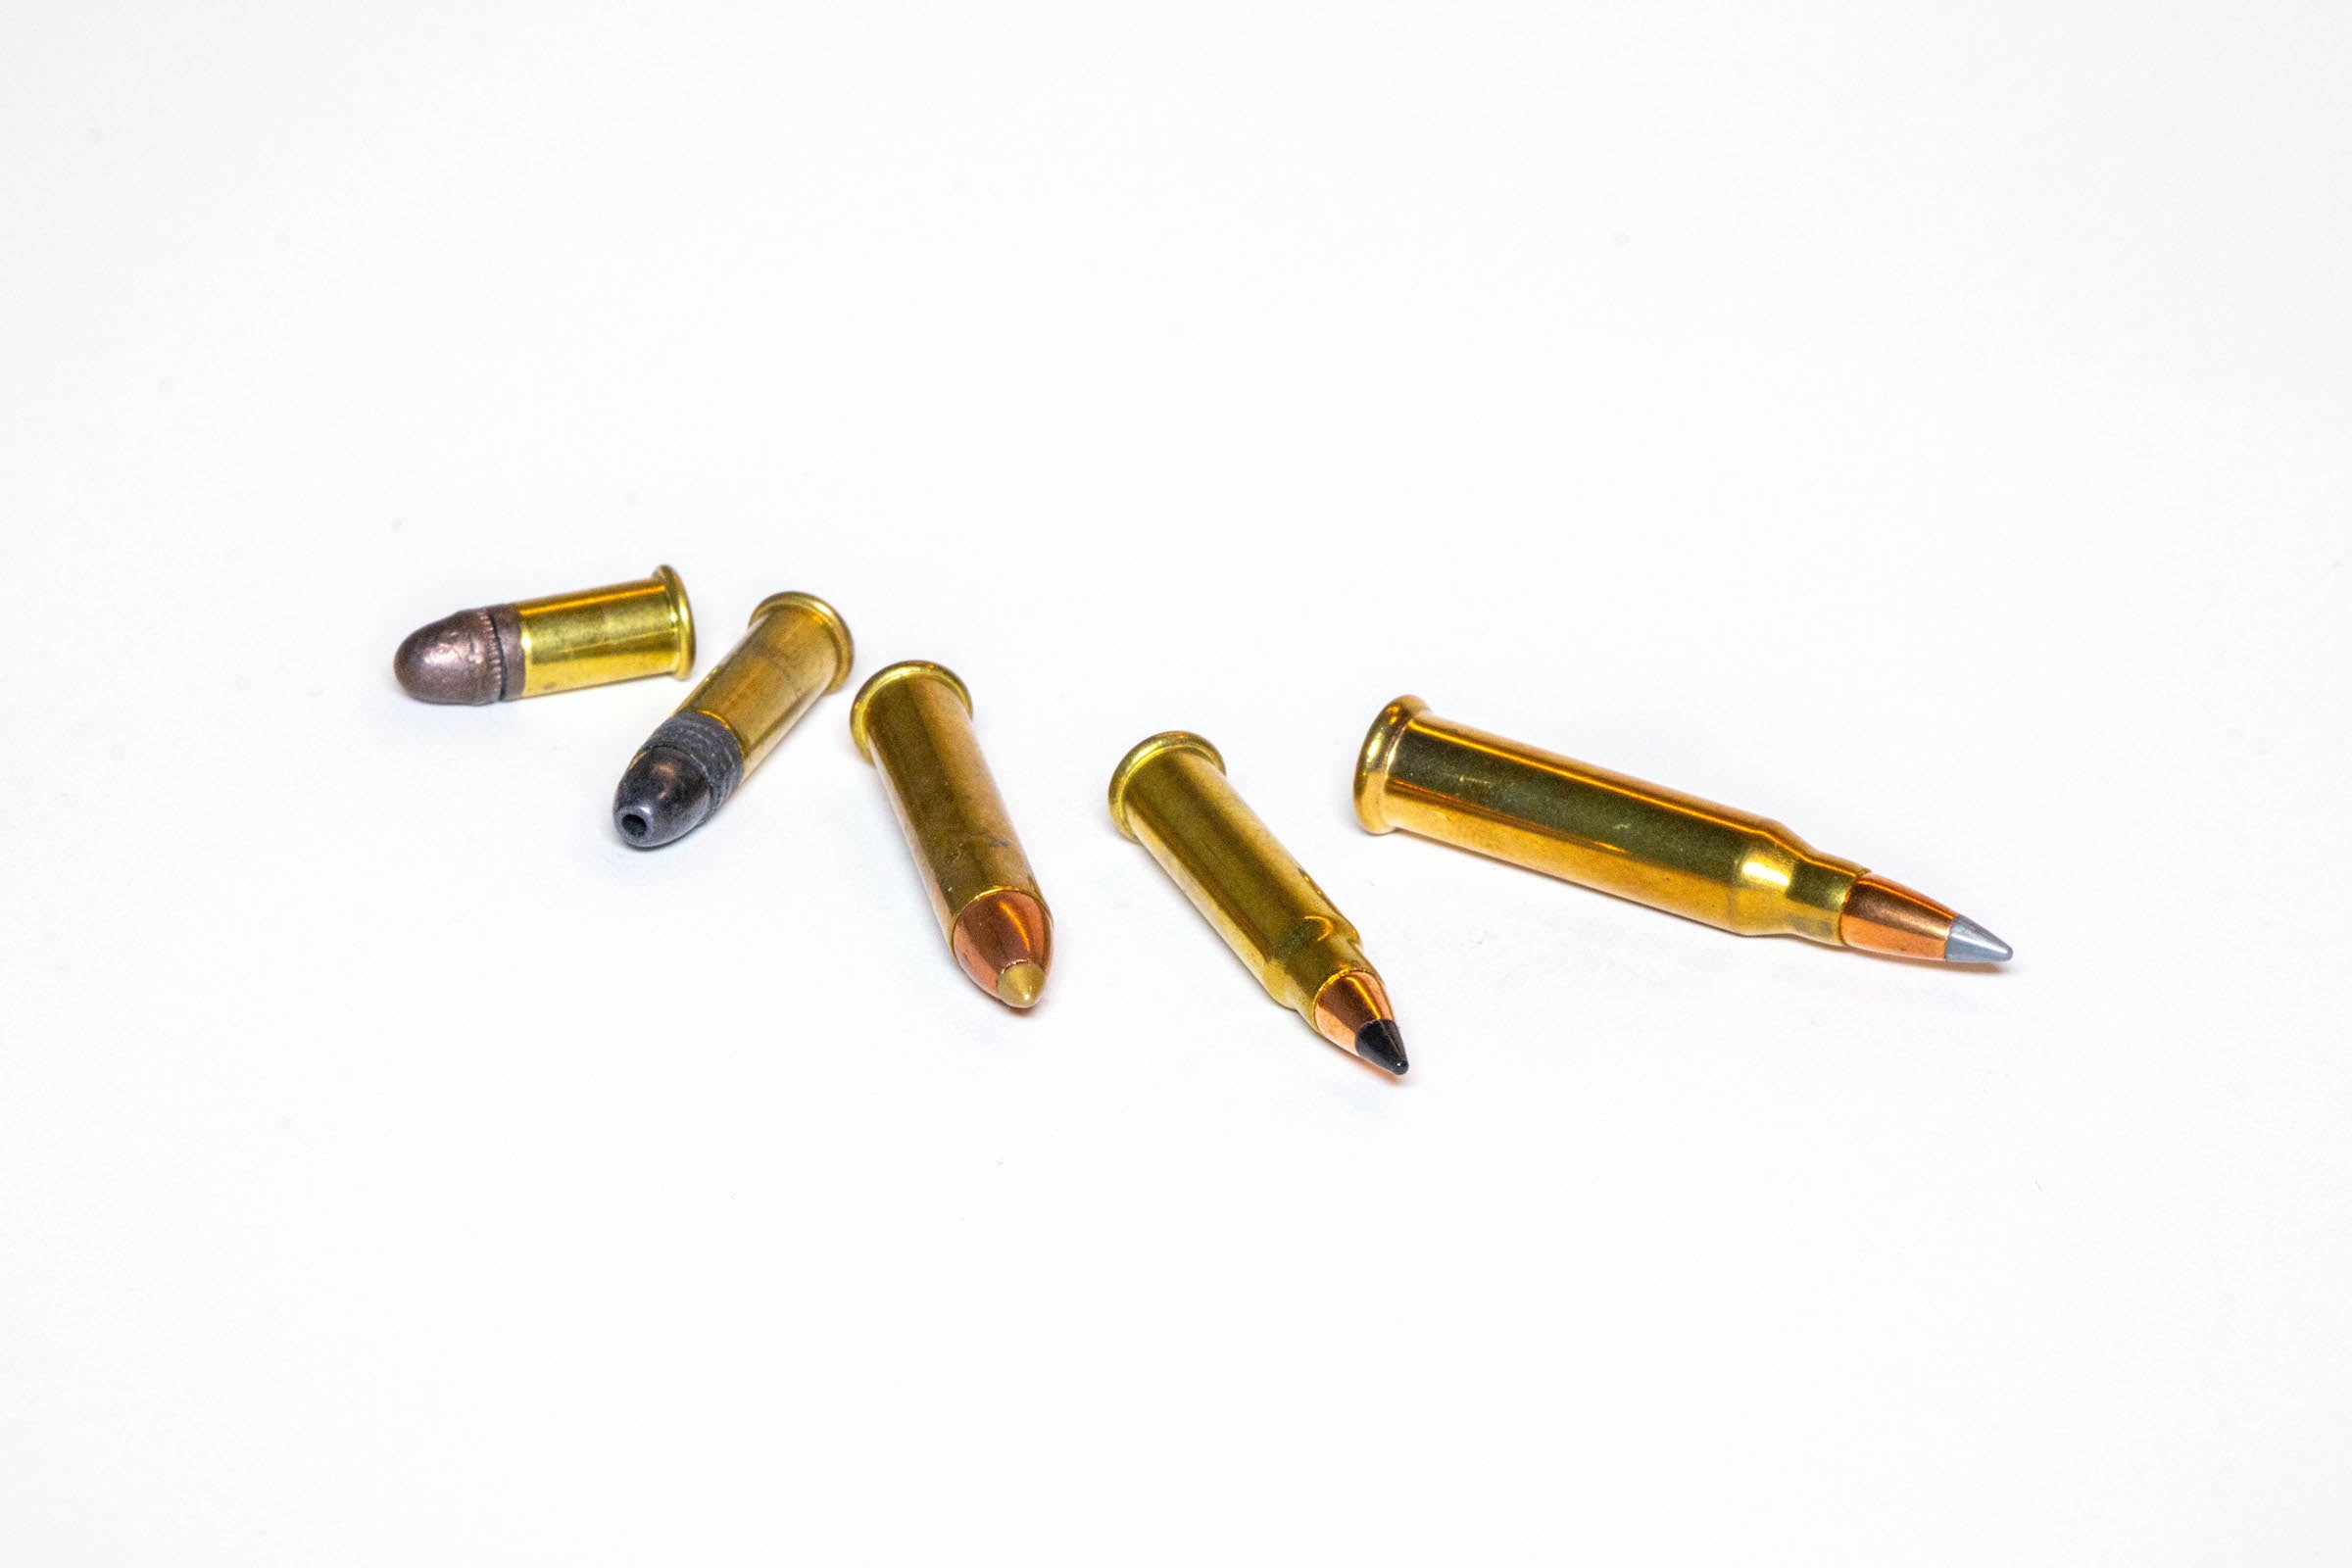 Rimfire cartridges on a white background.